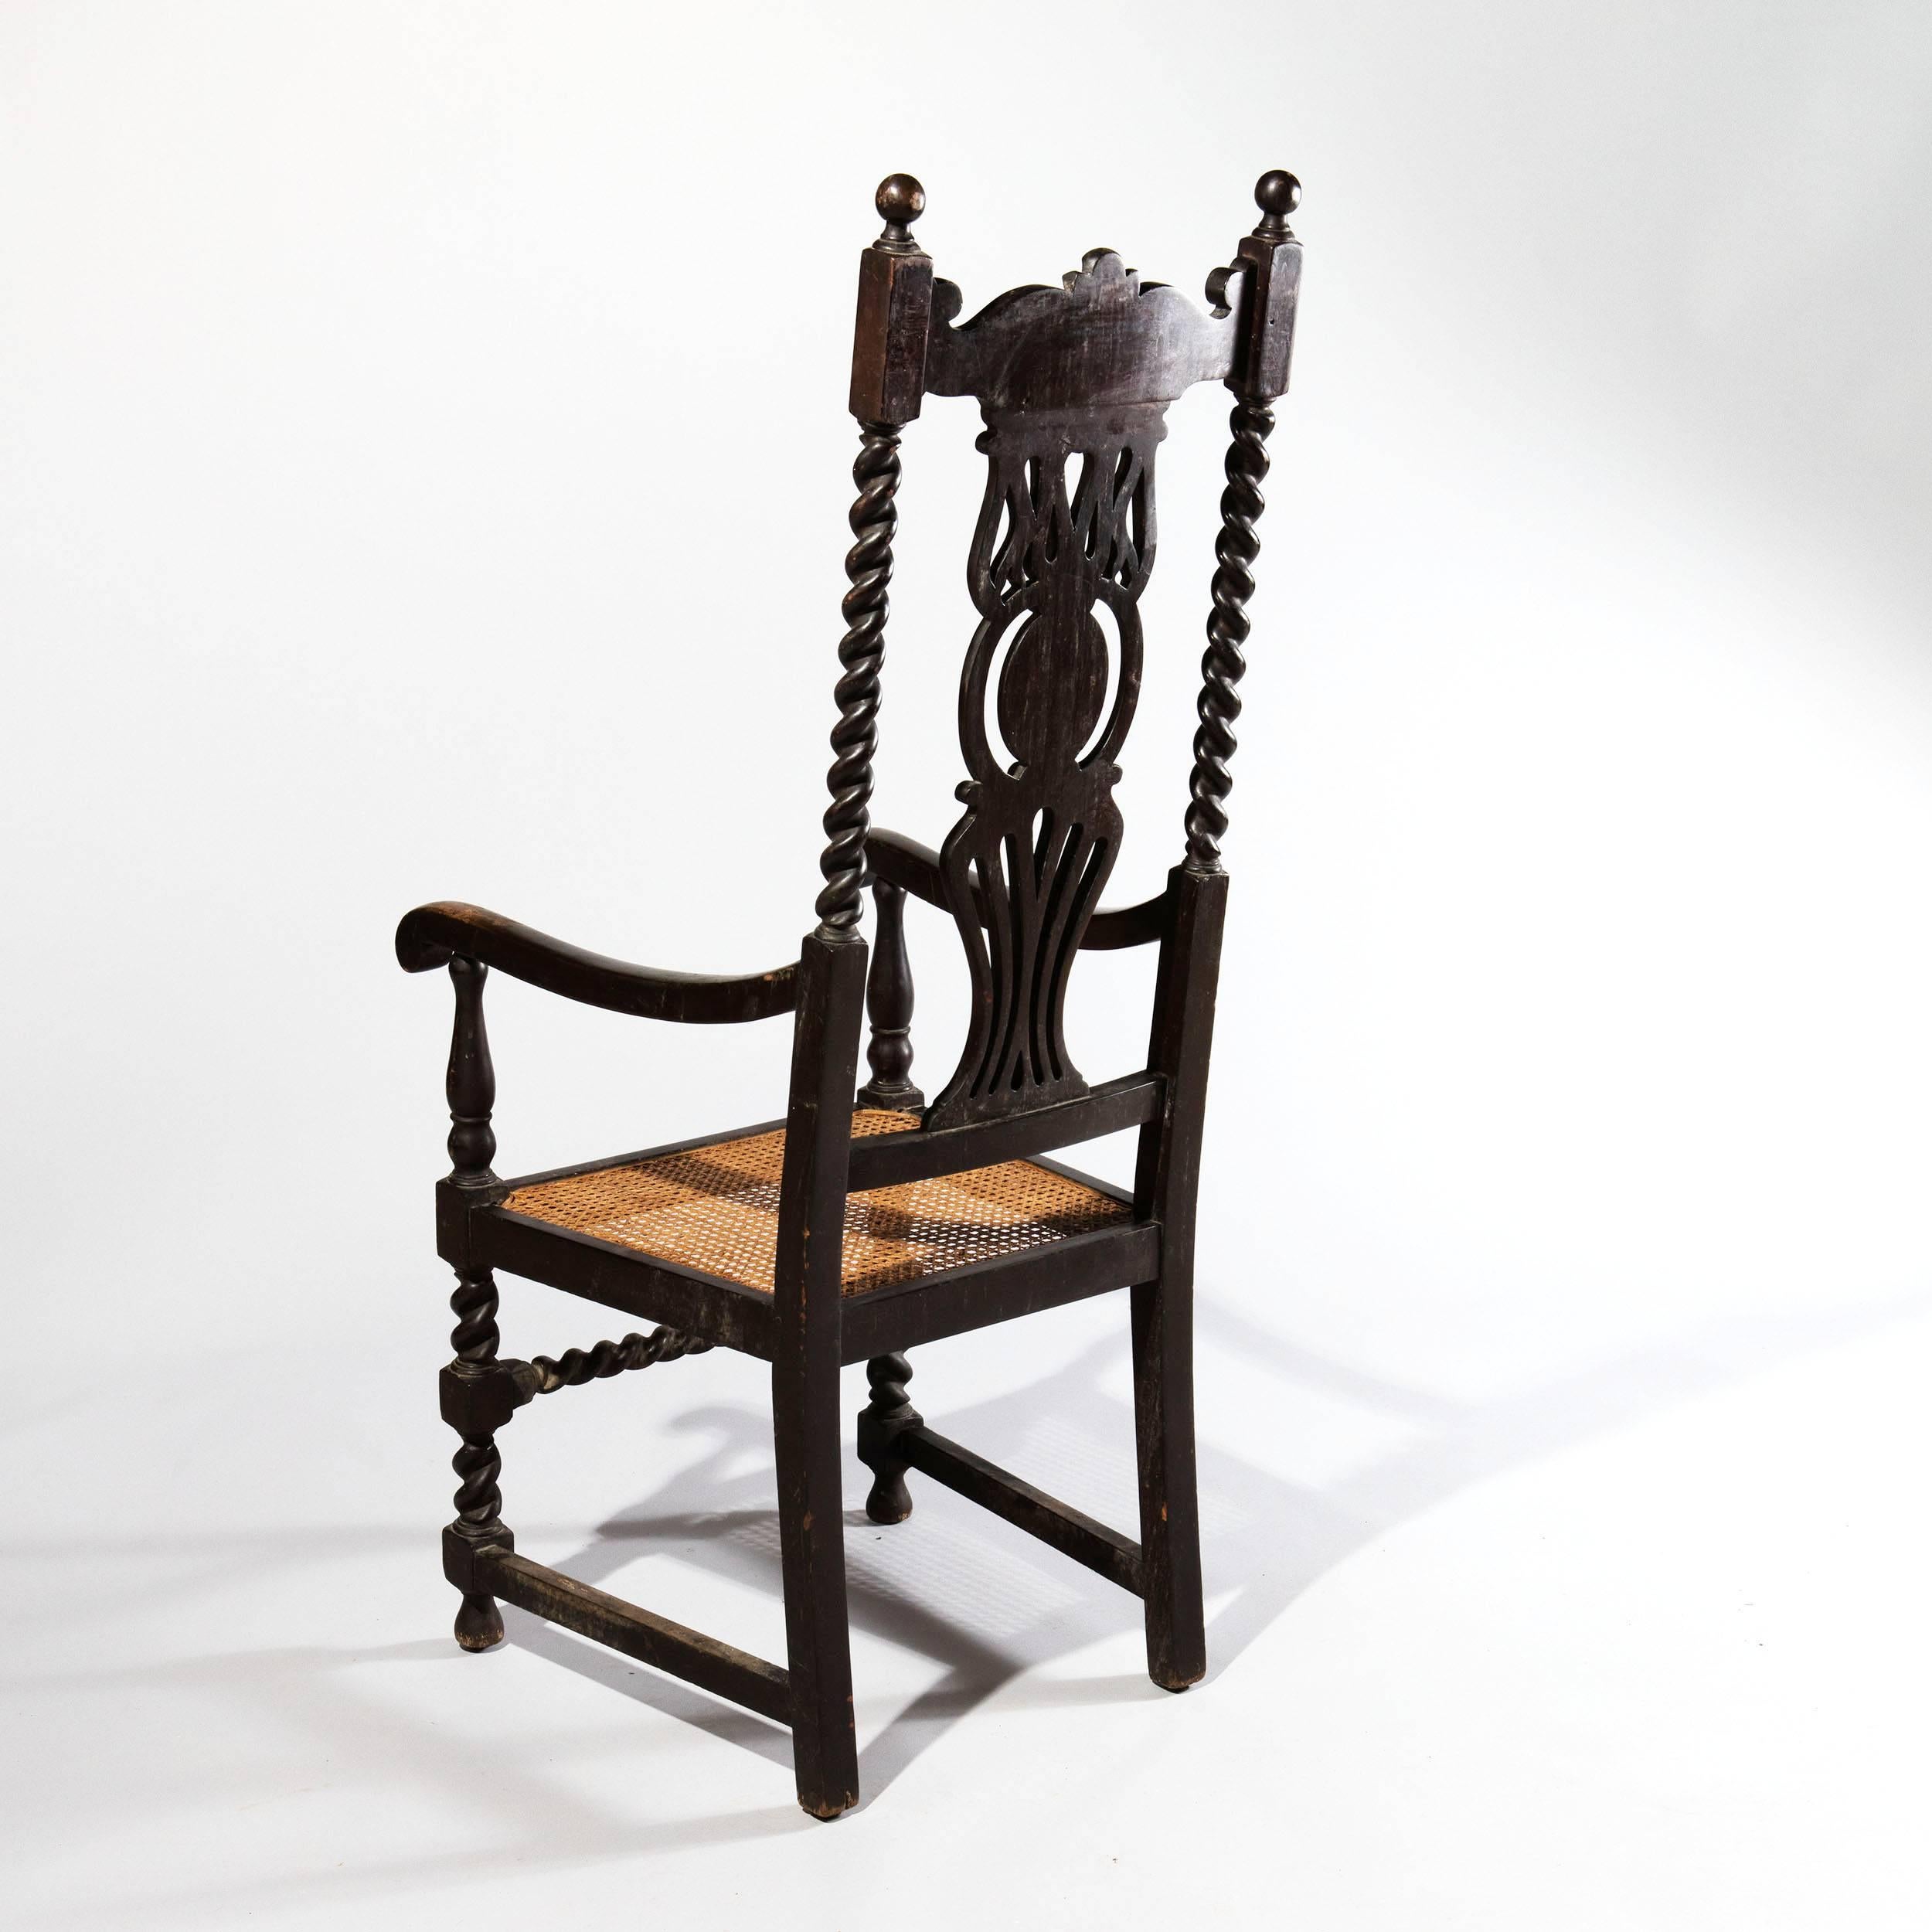 19th Century Ebonised Anglo Indian High Back Chair In Excellent Condition For Sale In London, by appointment only